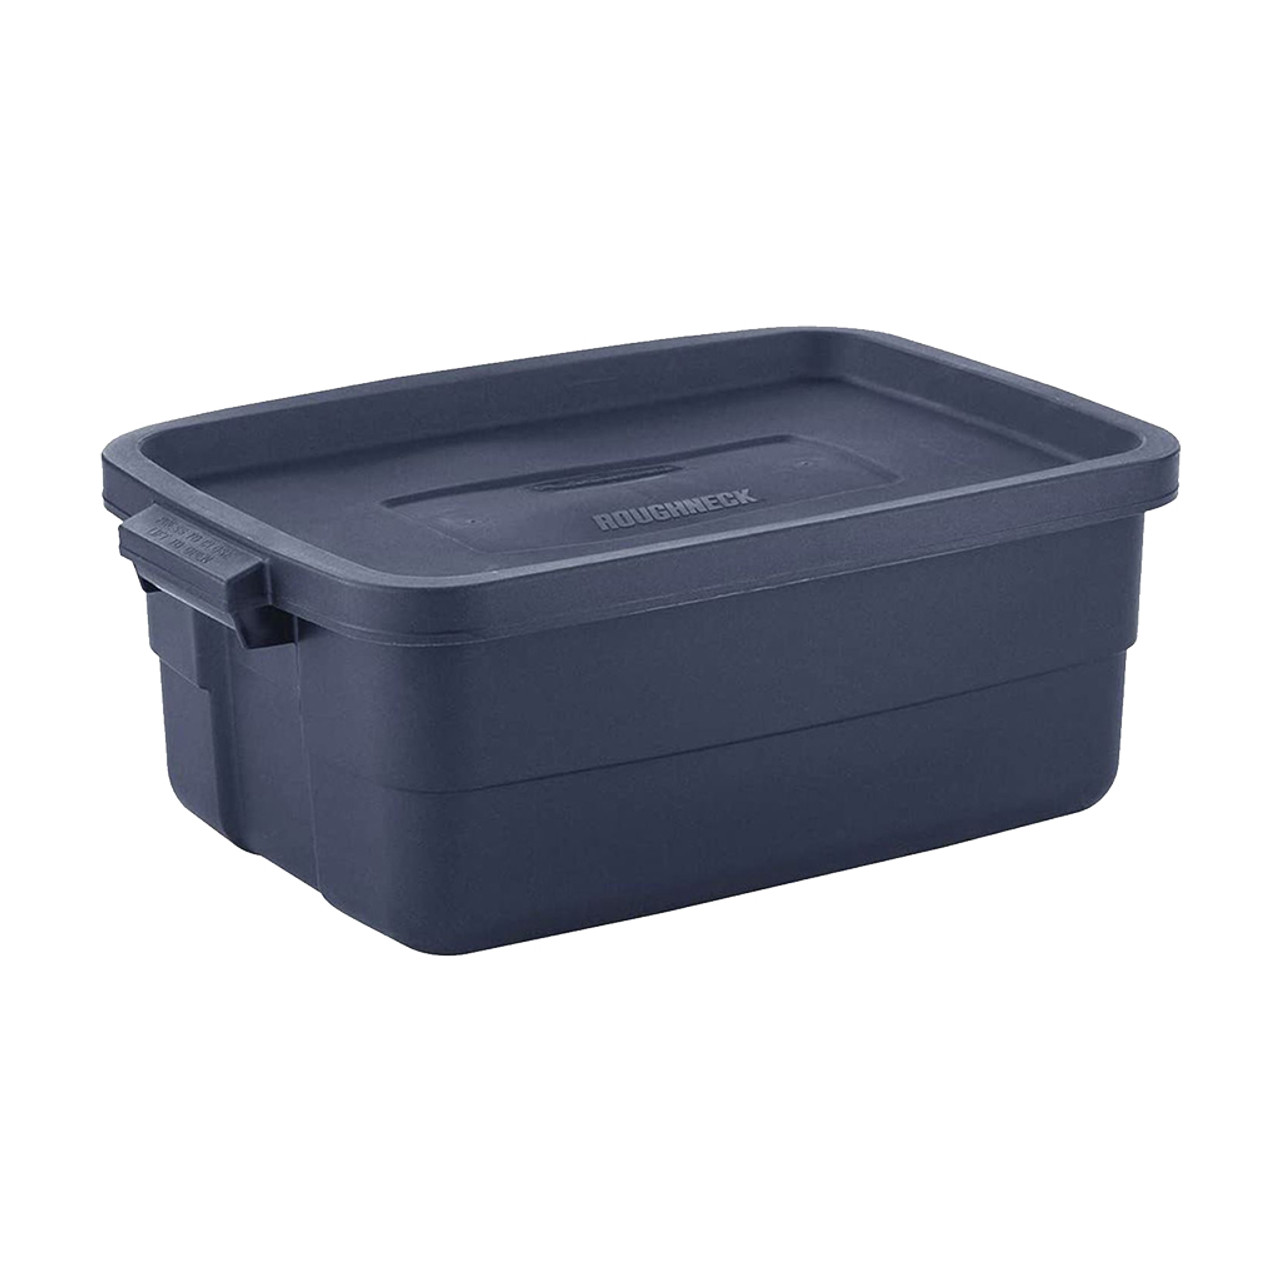 Rubbermaid Roughneck Storage Tote, 3 Gallon - Midwest Technology